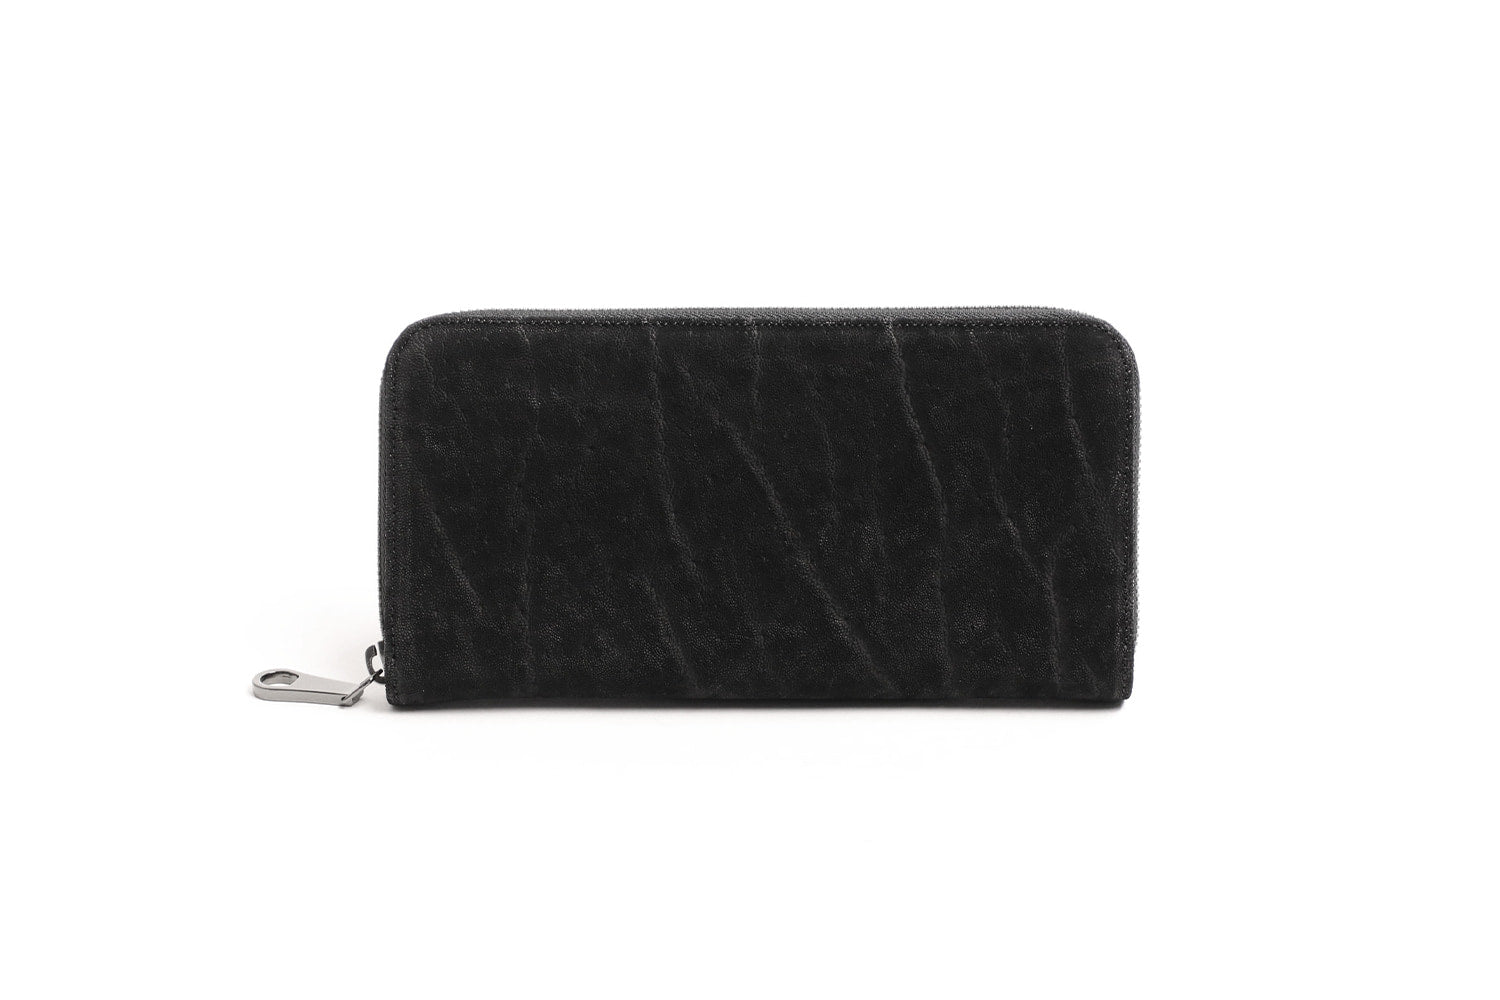 Luggage AOKI 1894 / African Elephant A round zipper long wallet made of elephant leather with a focus on neatness.